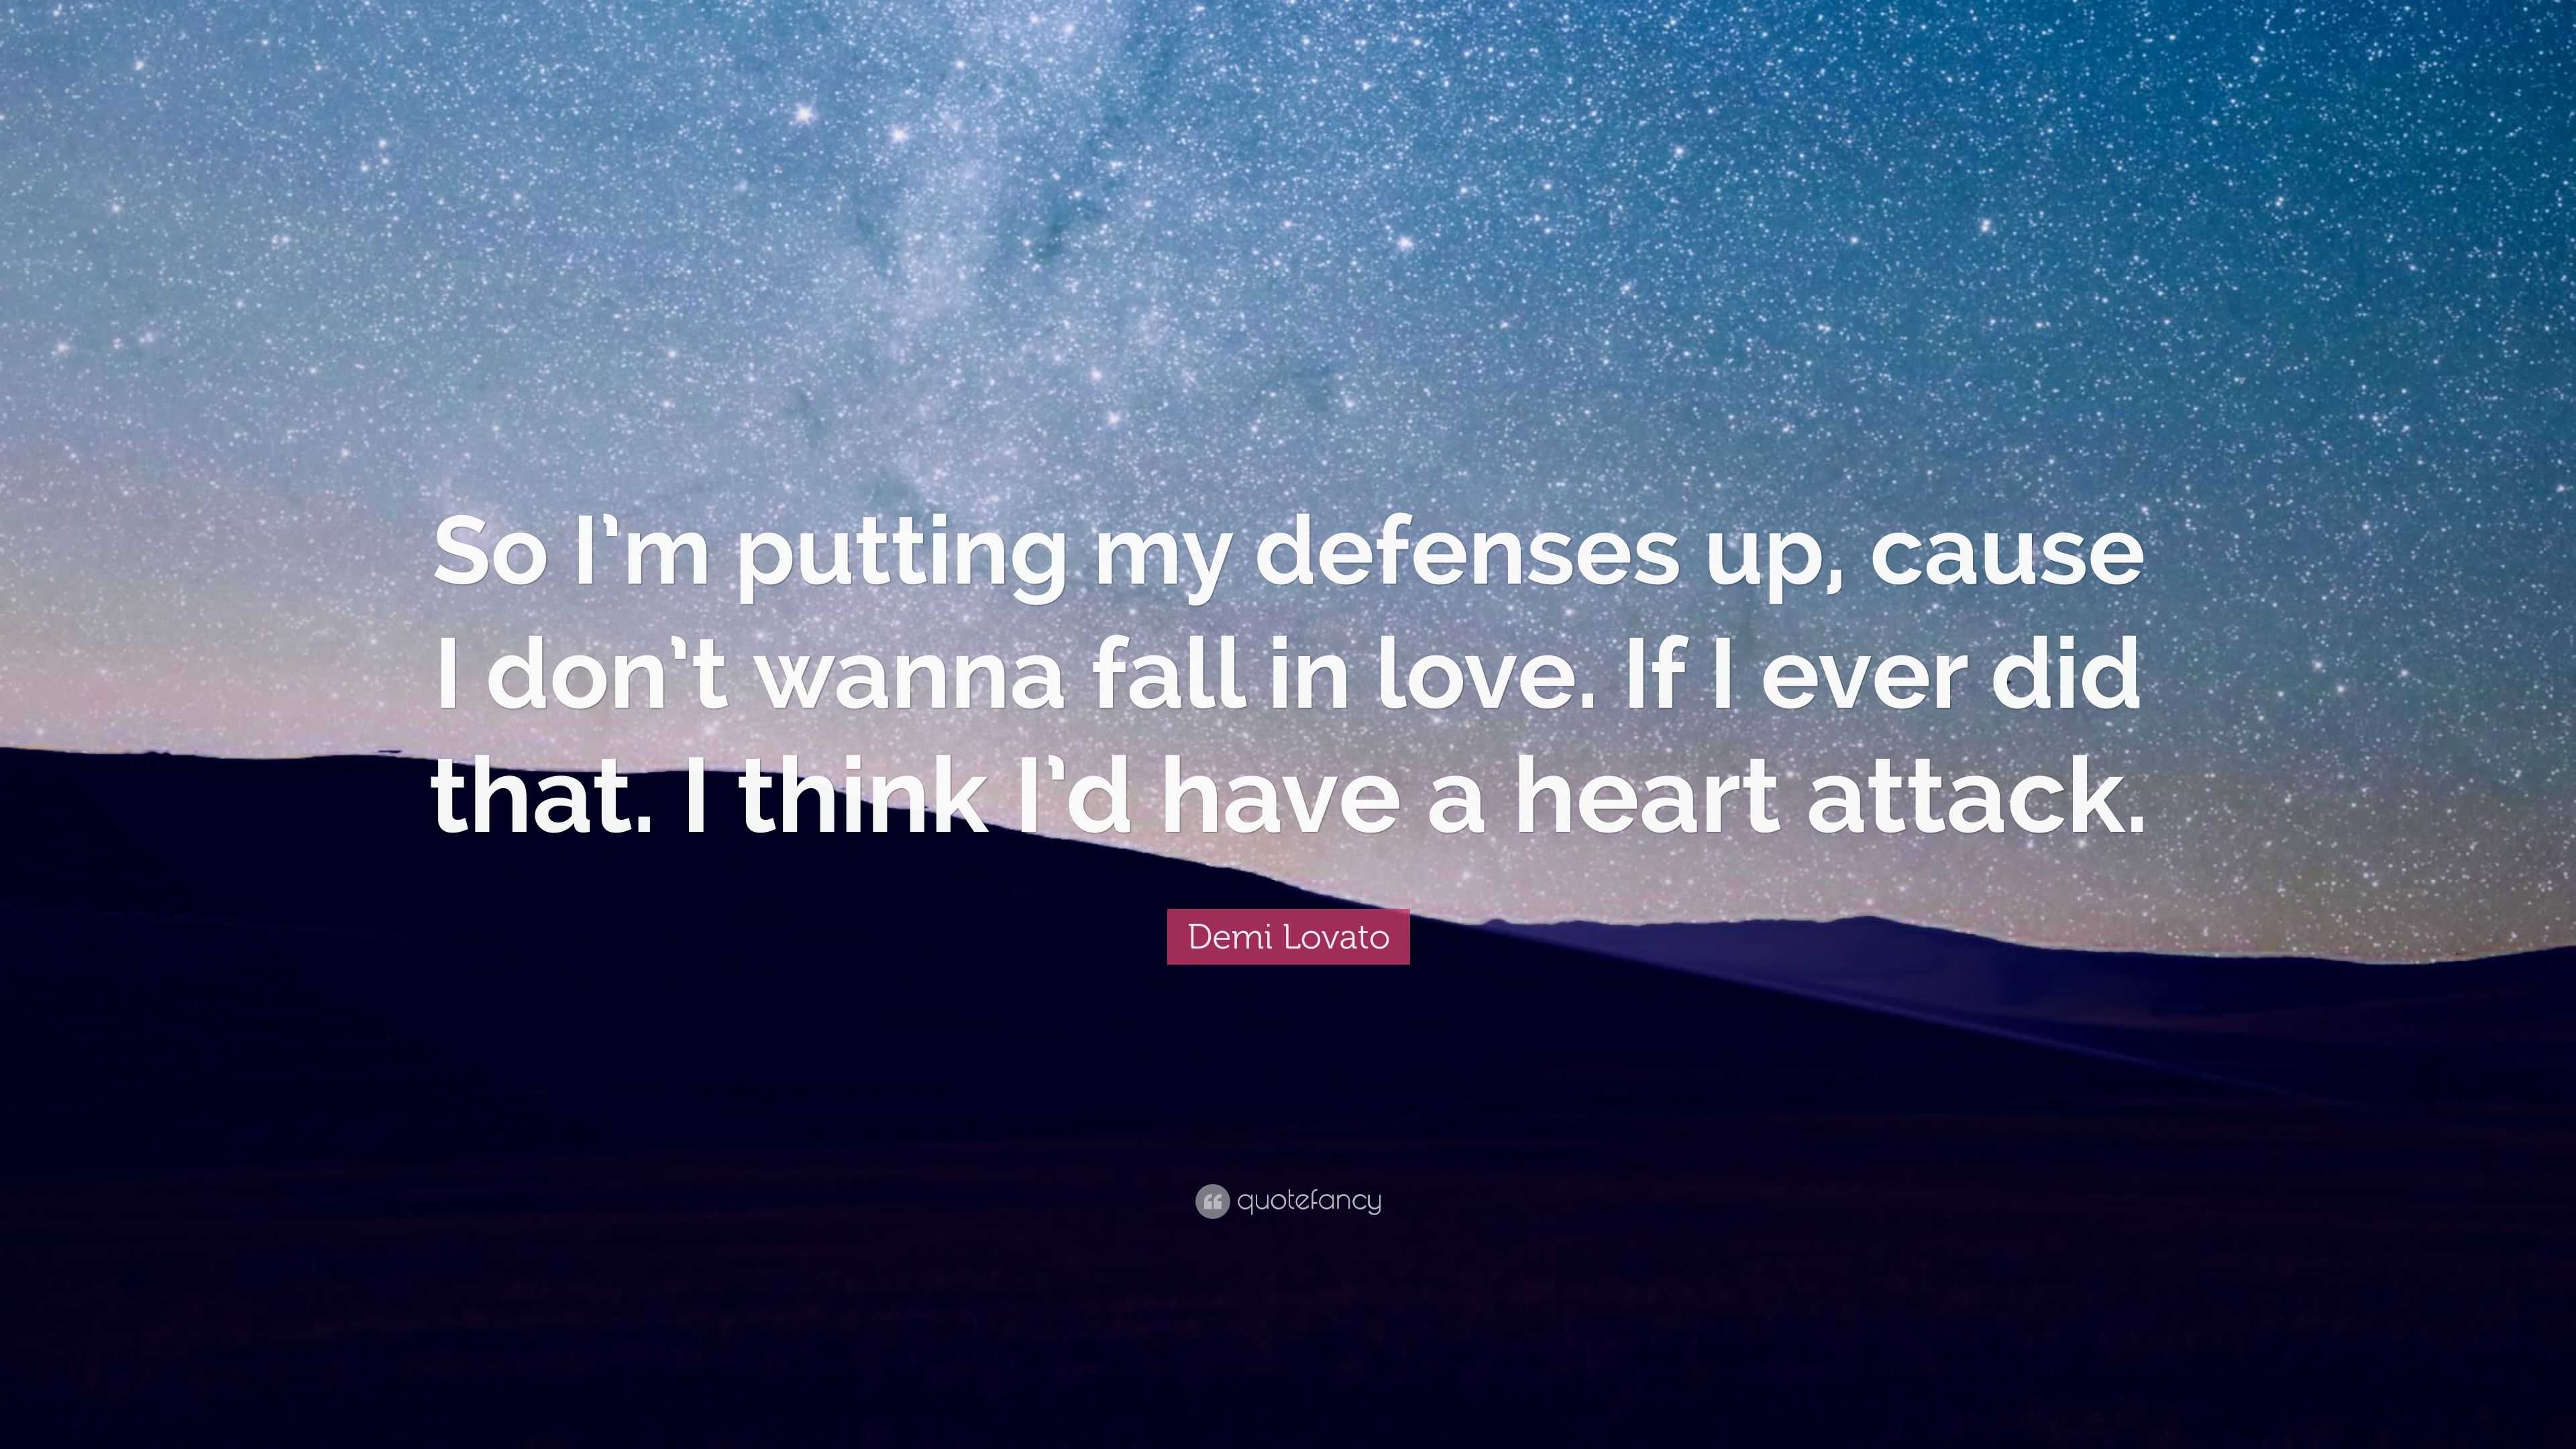 Demi Lovato Quote “So I m putting my defenses up cause I